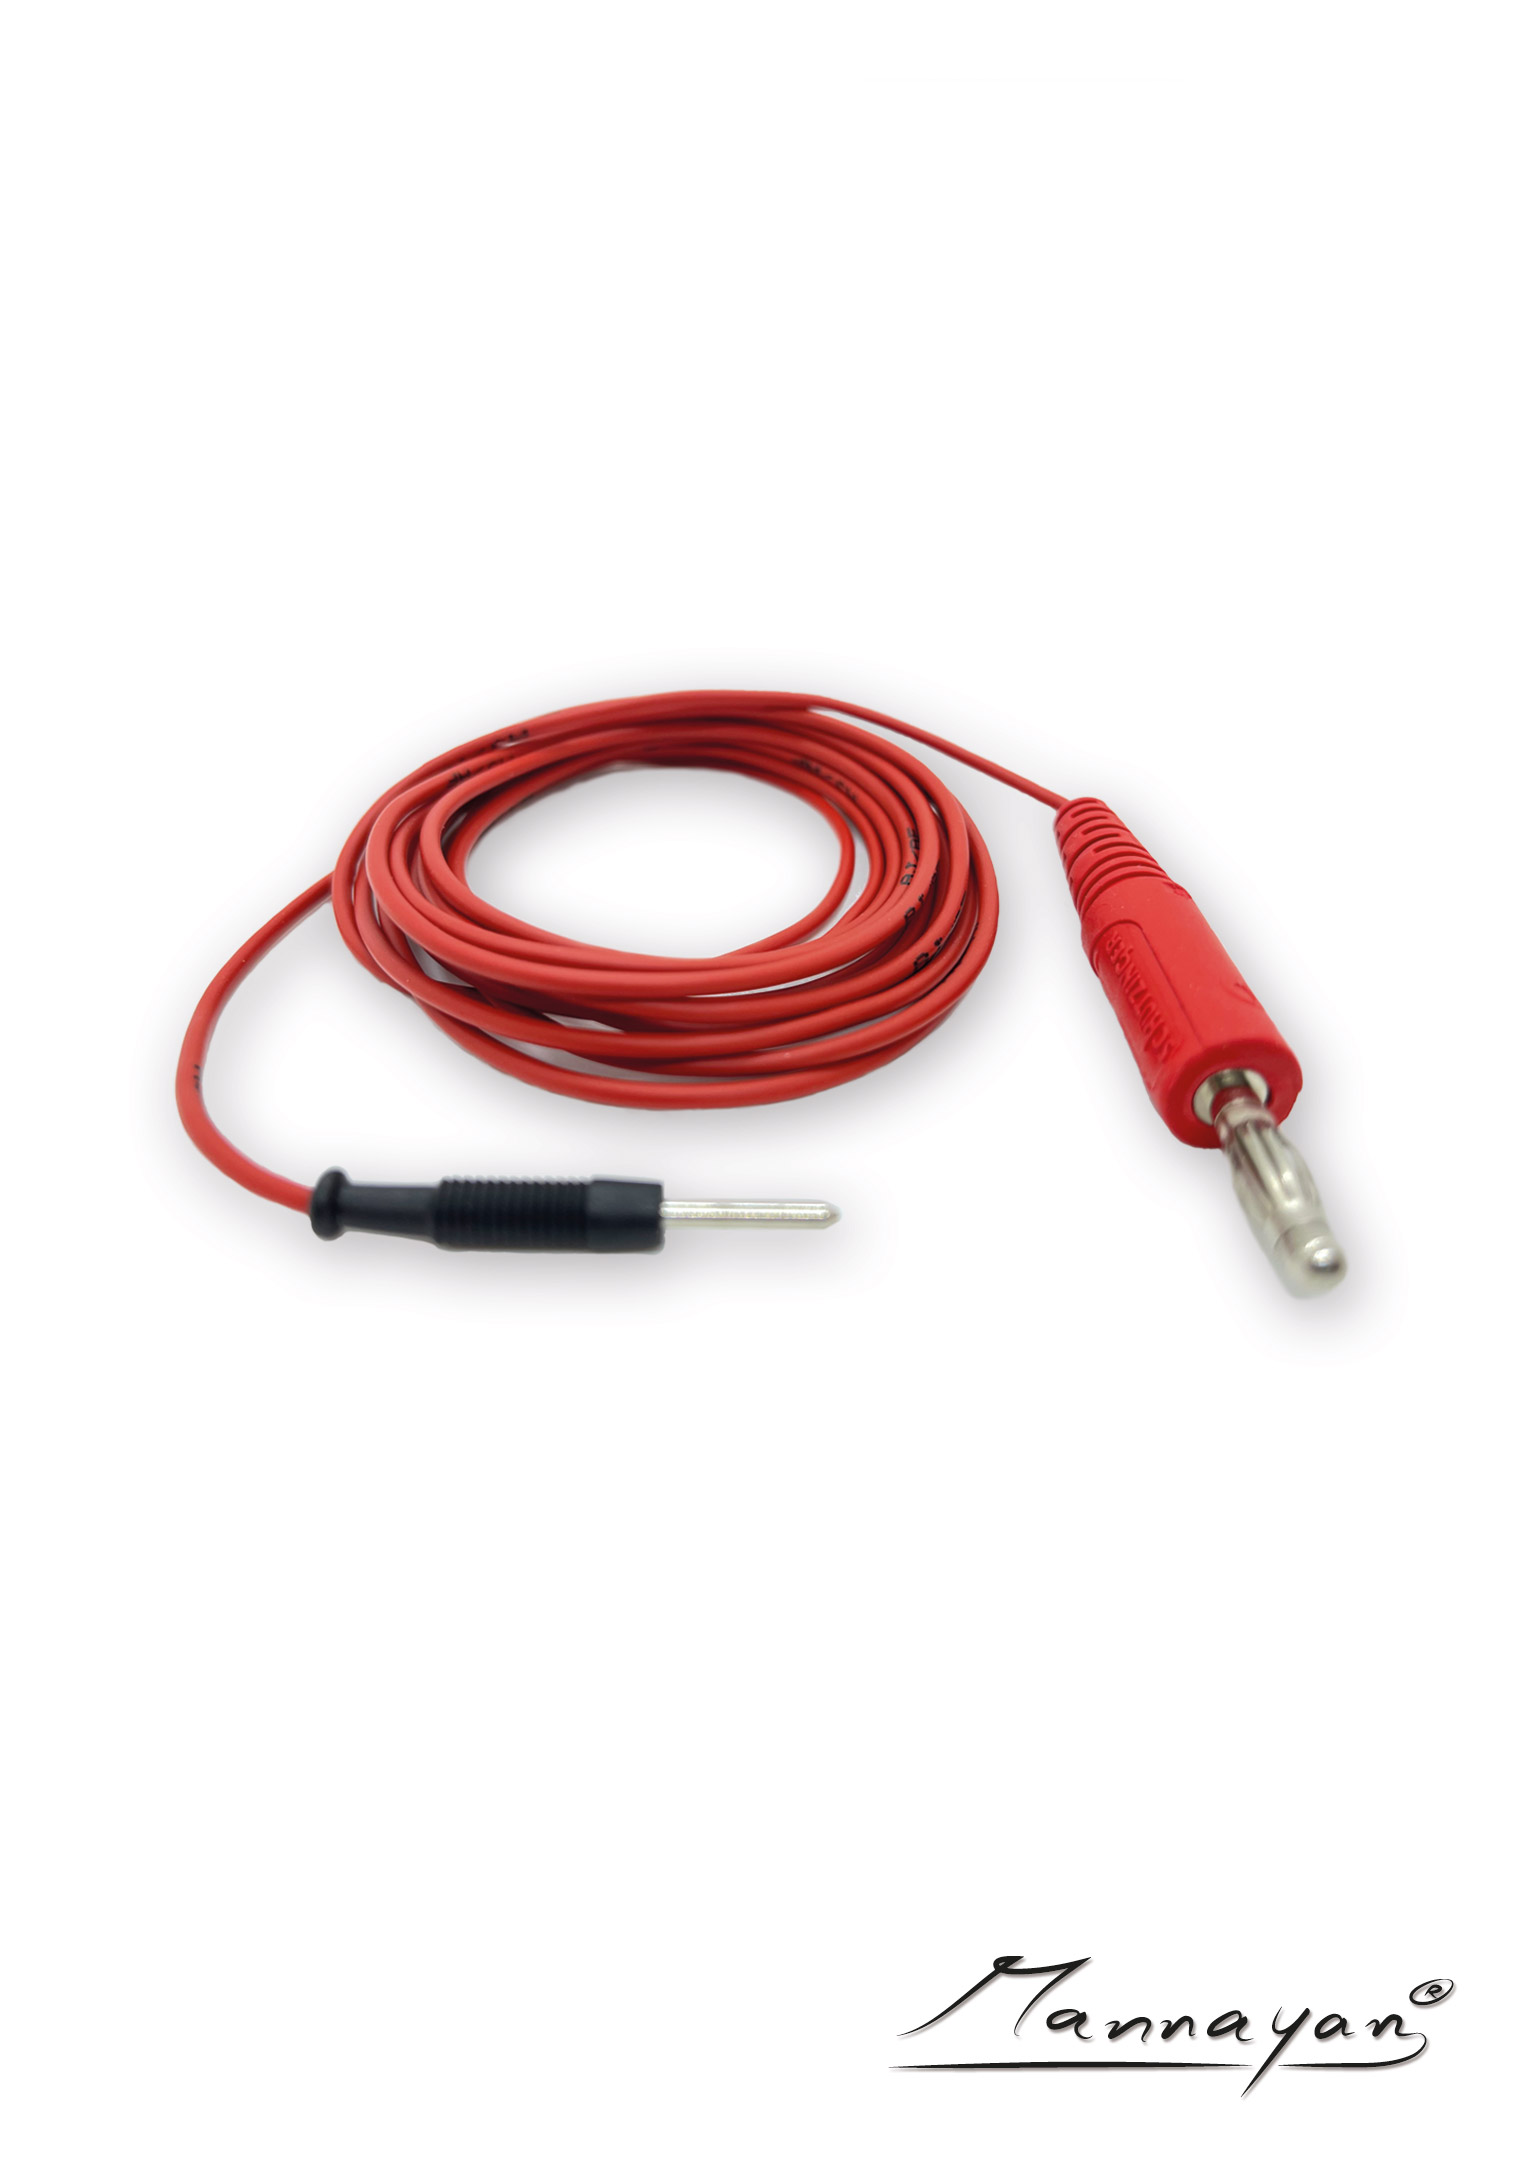 Cable (2,5 m) with connector adapter for textile surface electrodes (red)